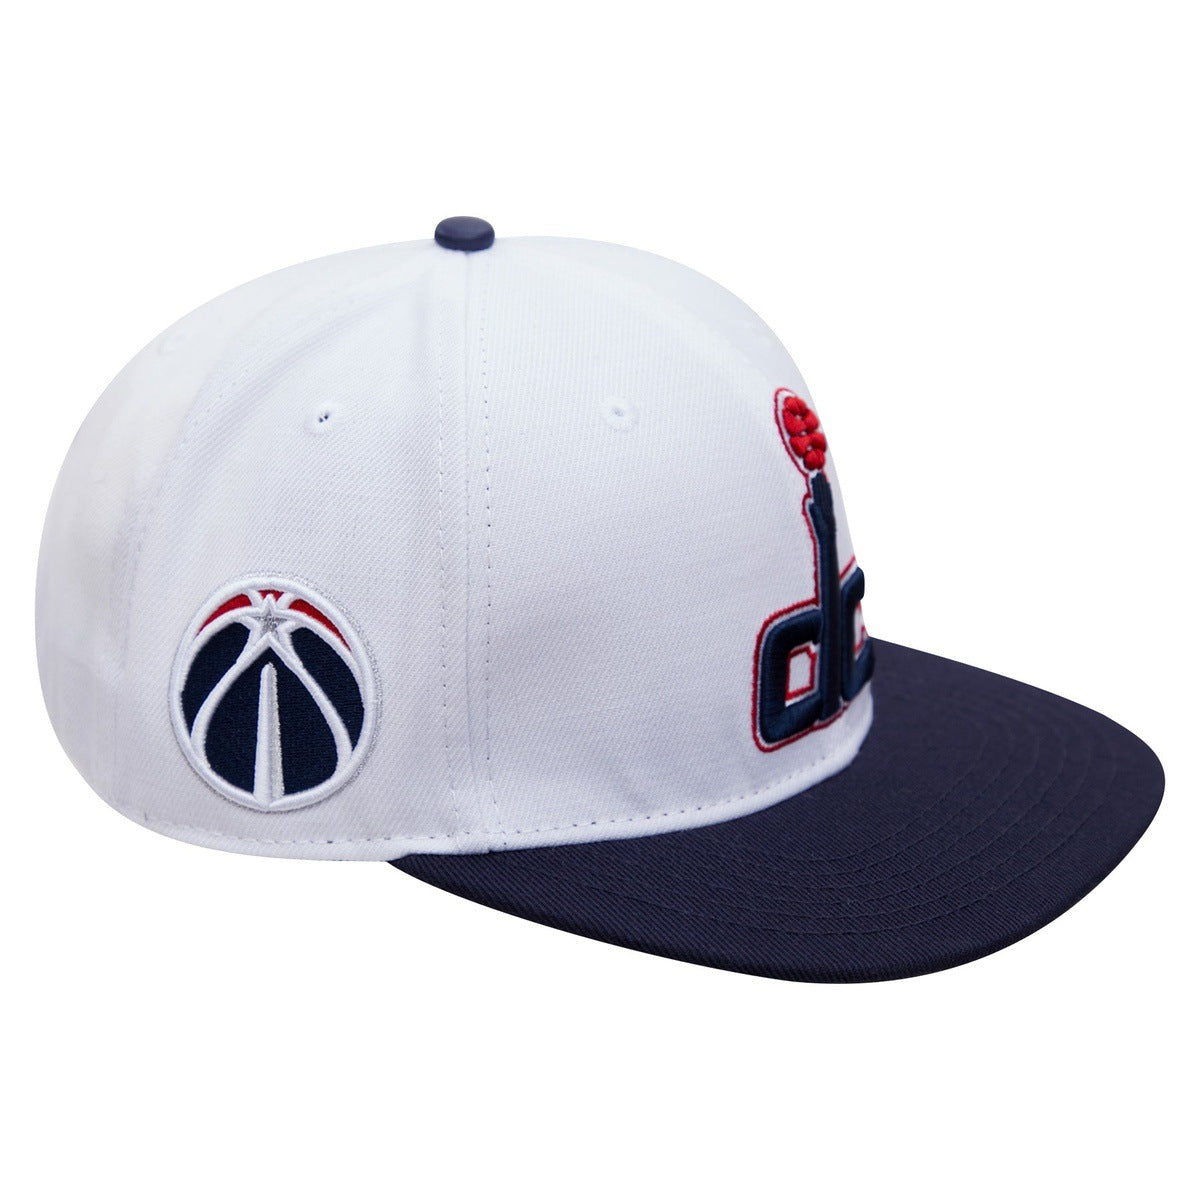 Official Washington Wizards Hats, Snapbacks, Fitted Hats, Beanies